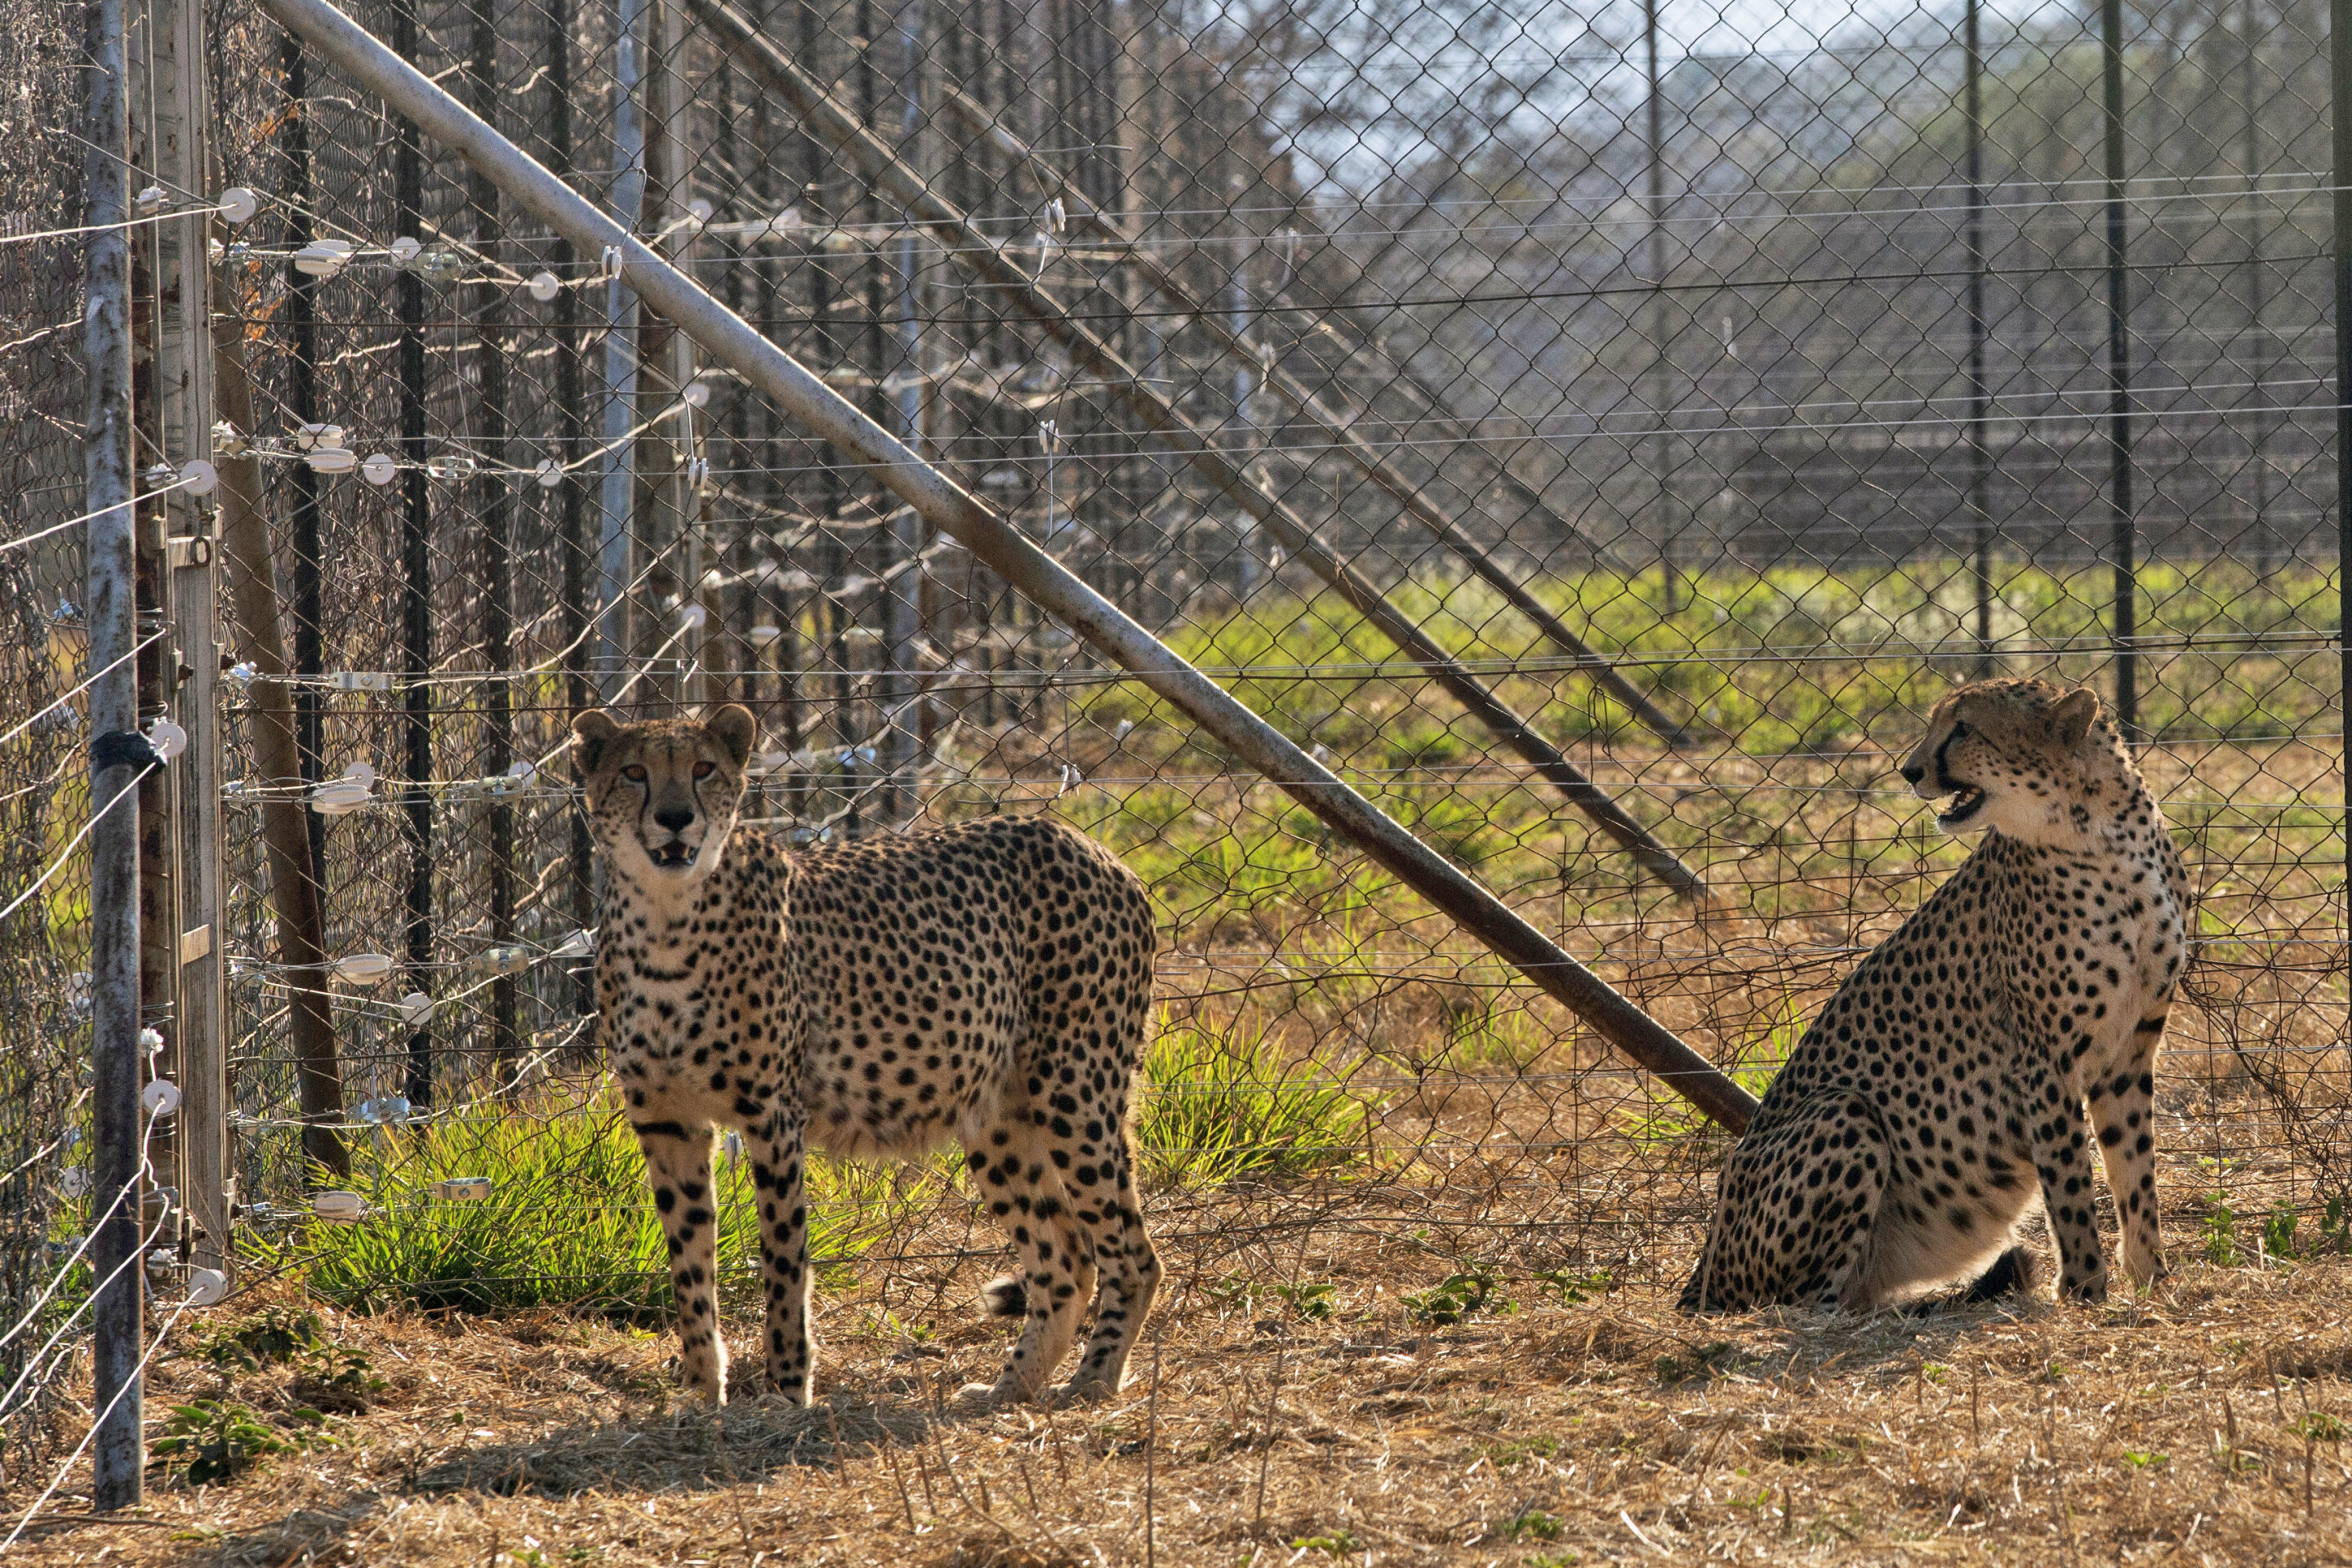 photo of Three cheetah cubs die in India amid sweltering heat wave image